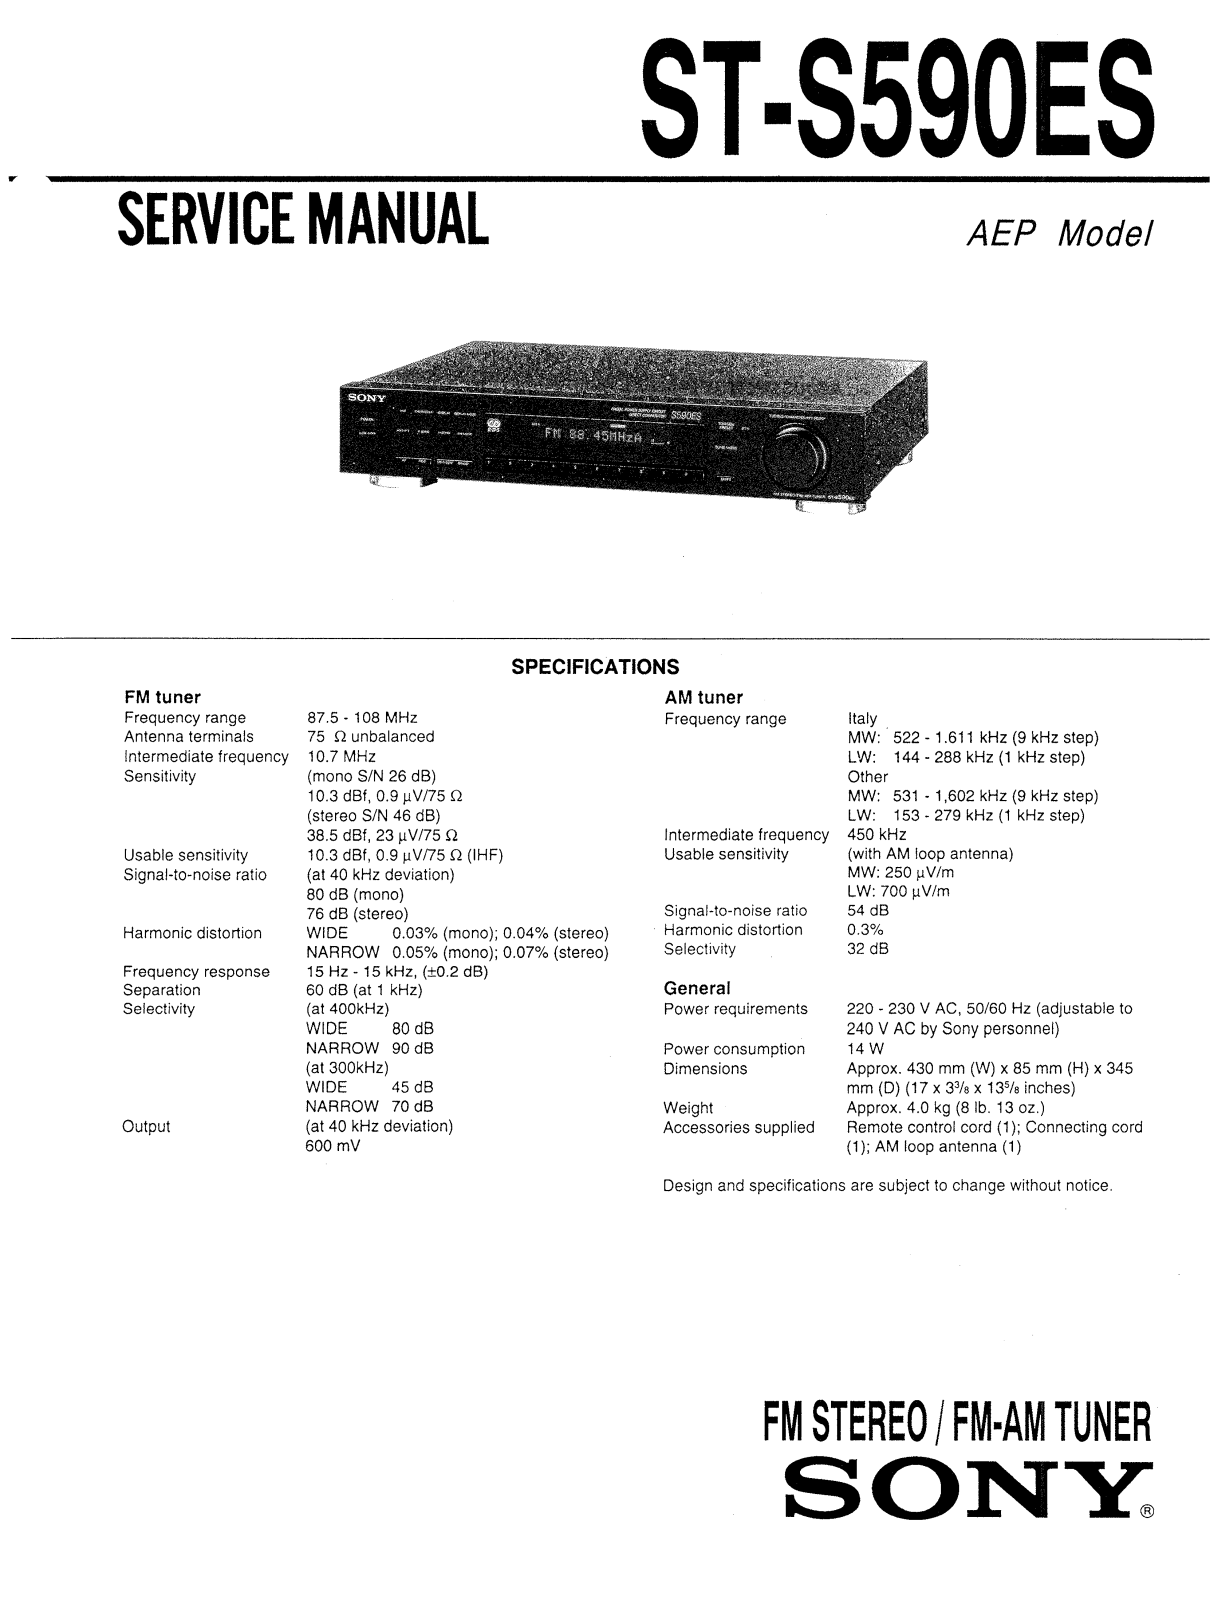 Sony STS-590-ES Service manual